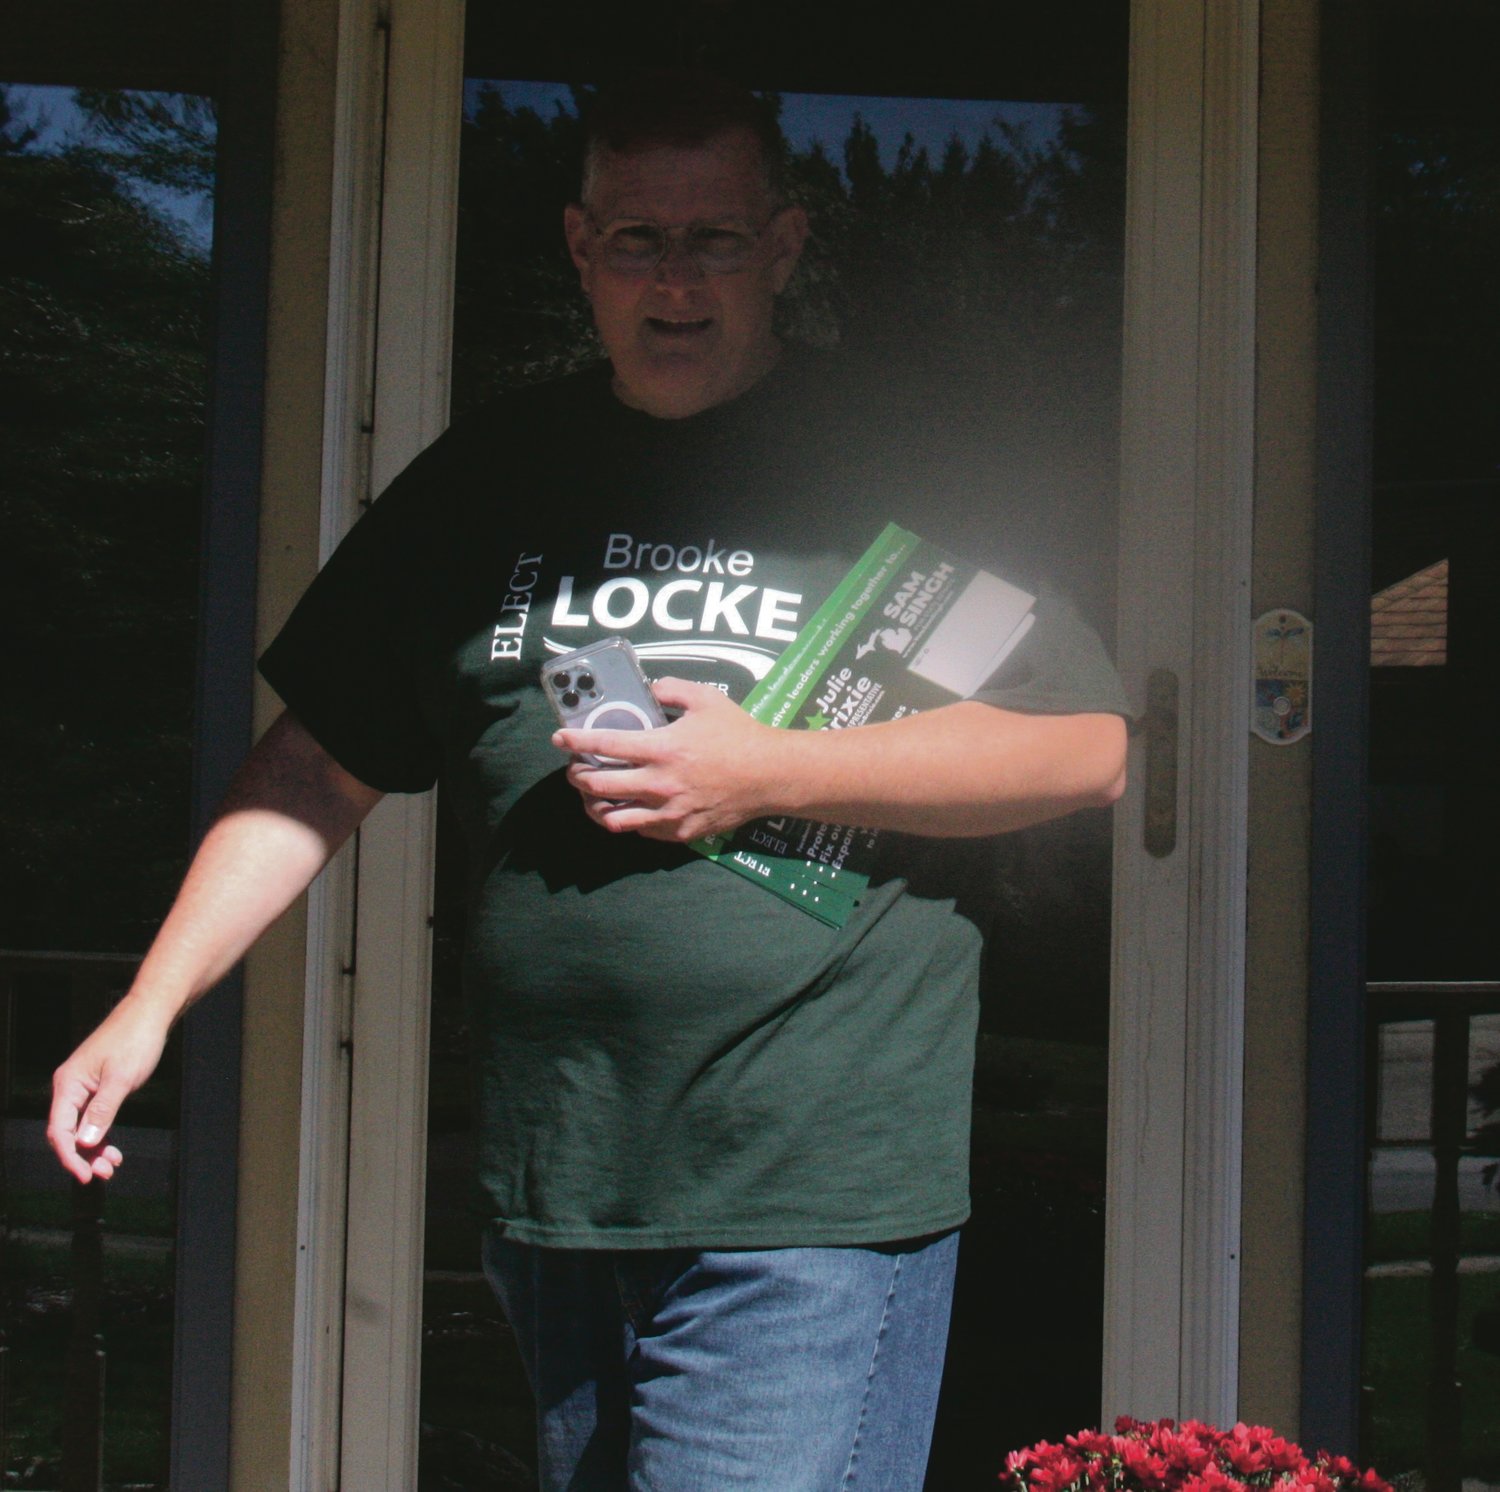 Brooke Locke, the Democratic candidate for the Ingham County Commission 15th District, leaves a porch after contacting voters.